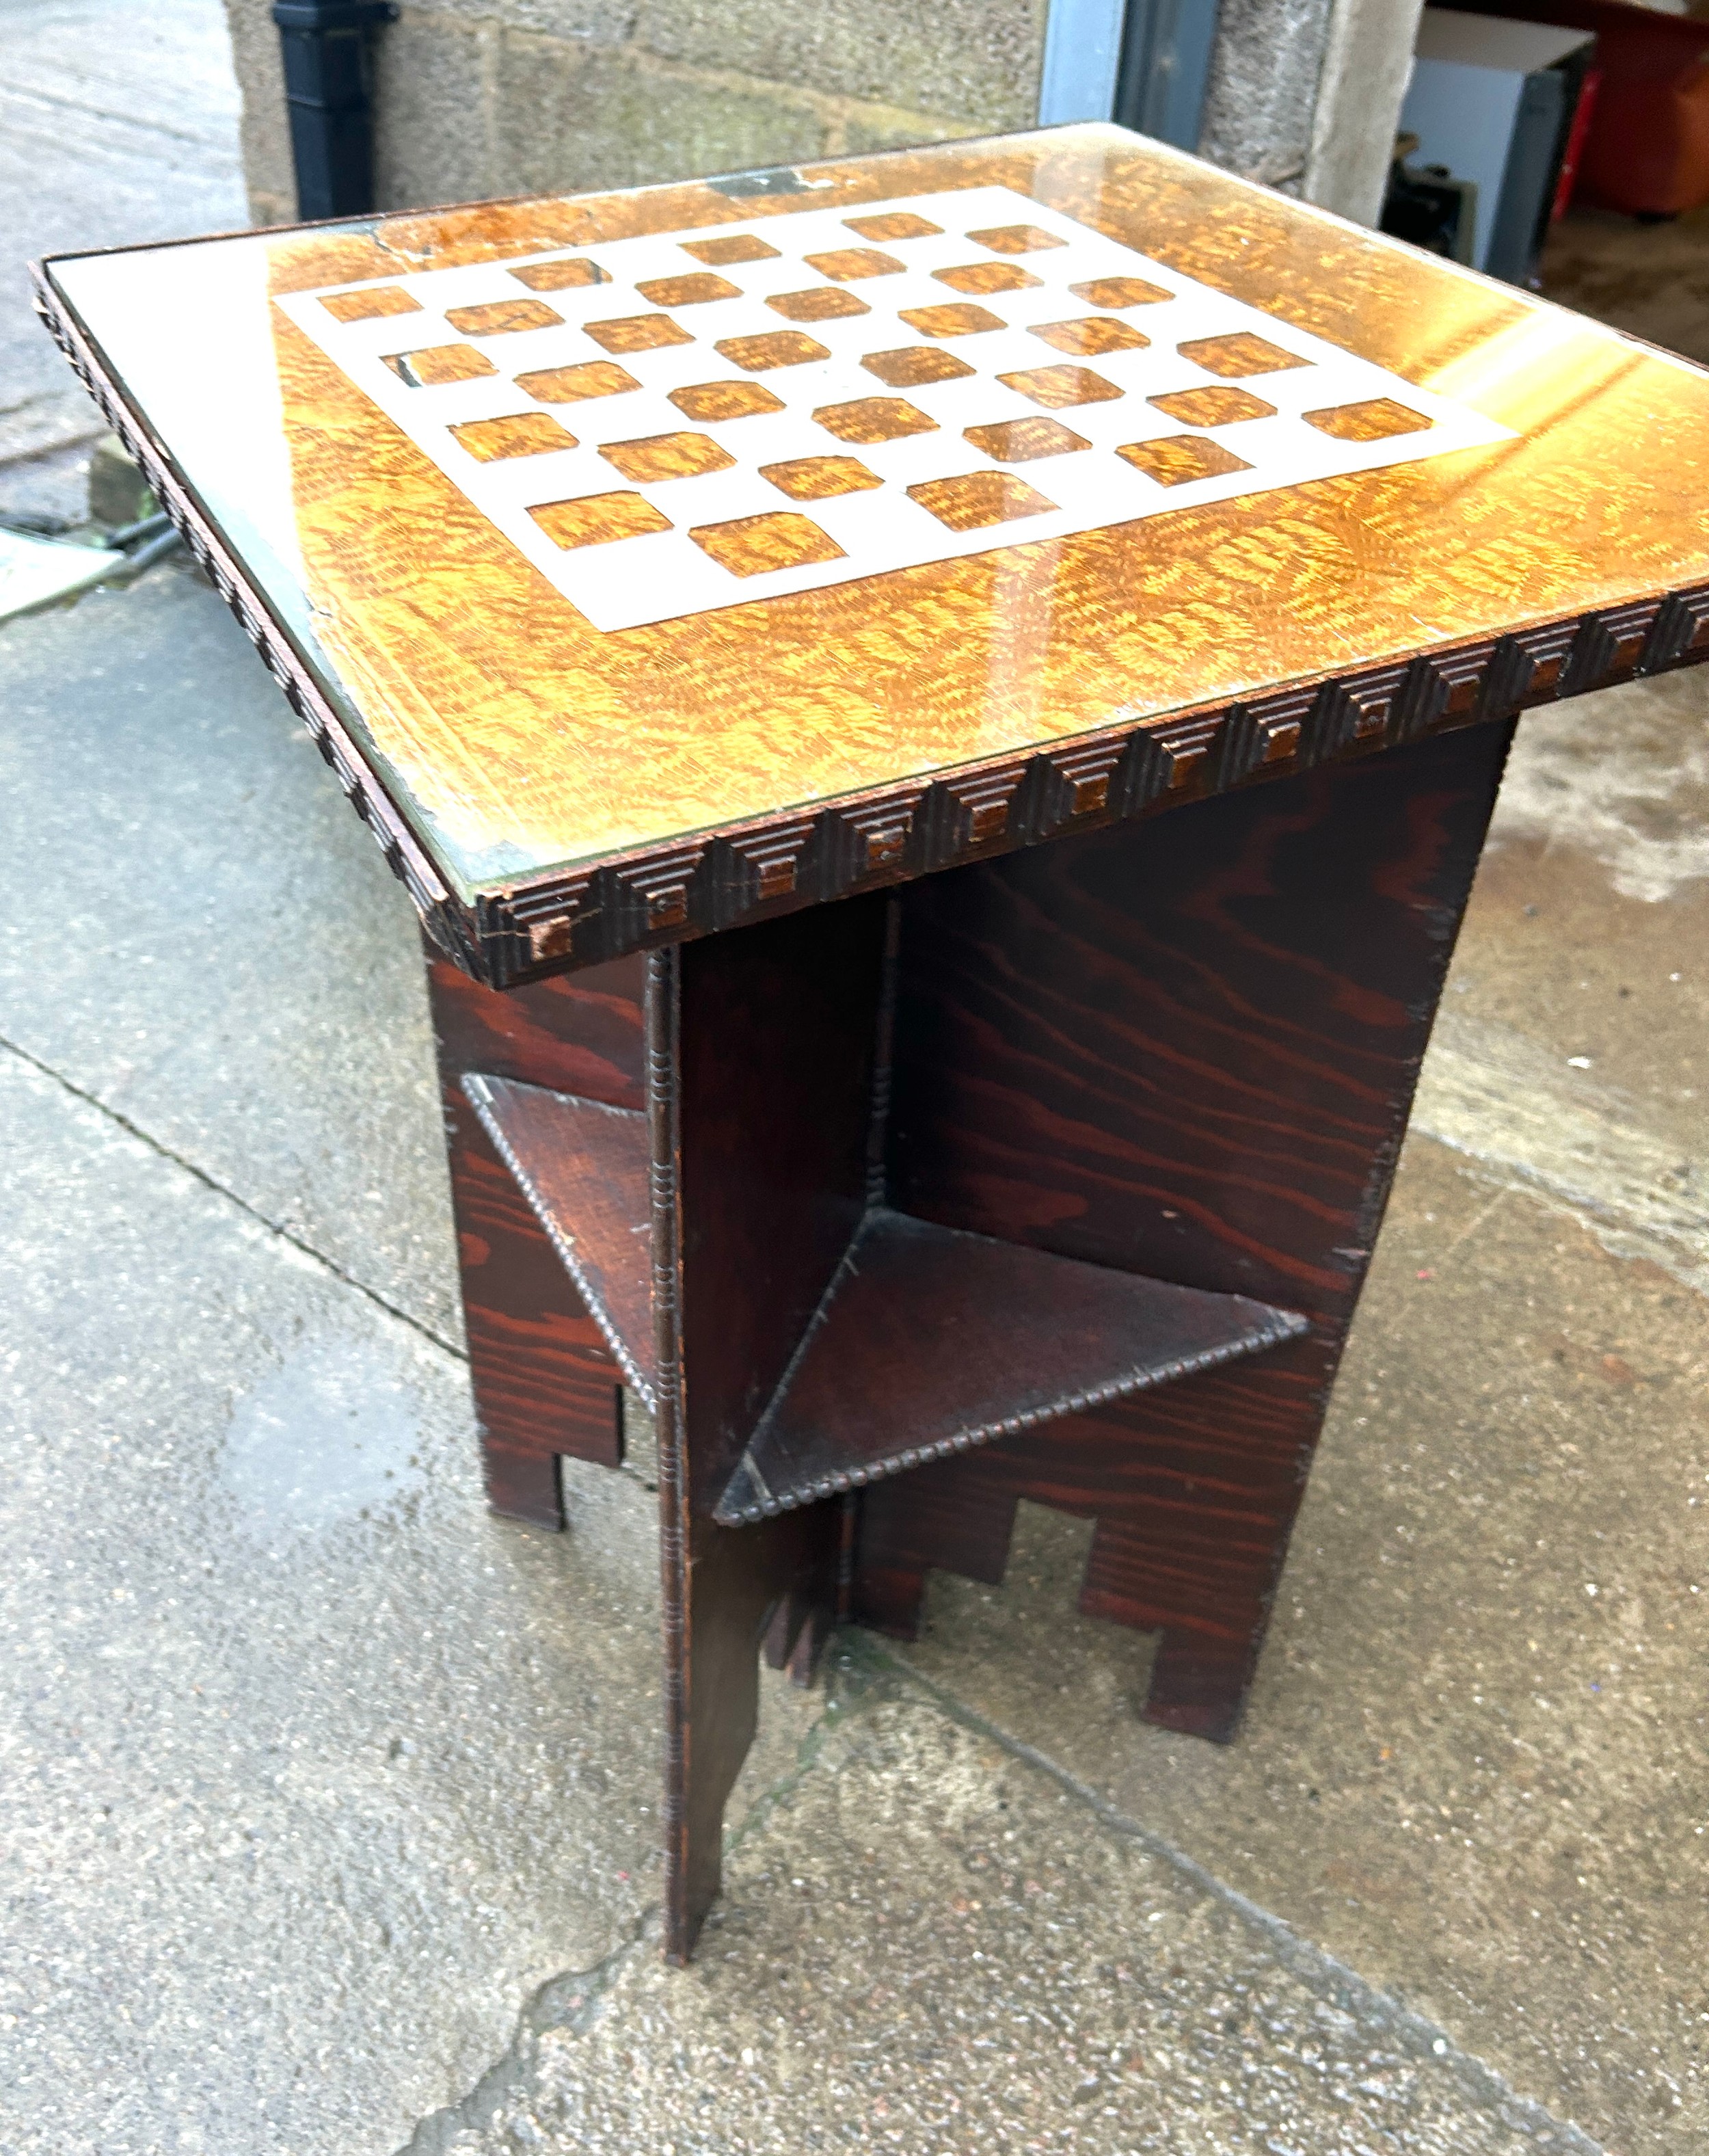 Small vintage carved games table measures approximately 29 inches tall 20 inches square - Image 2 of 3